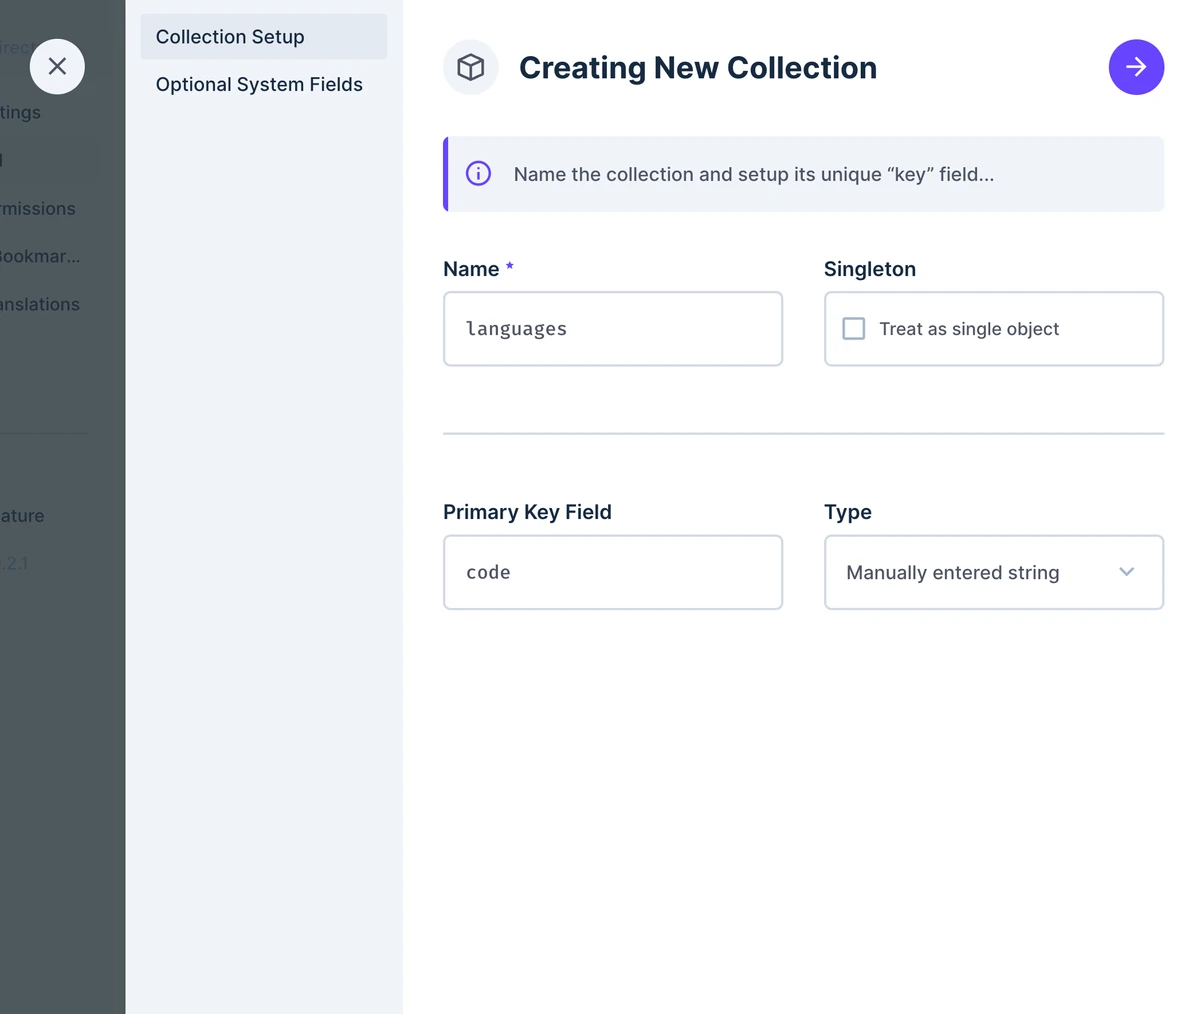 The Creating New Collection form overlay is shown. The active tab is Collection Setup. Name, Singleton, Primary Key Field, and Type fields are shown and editable by the user.